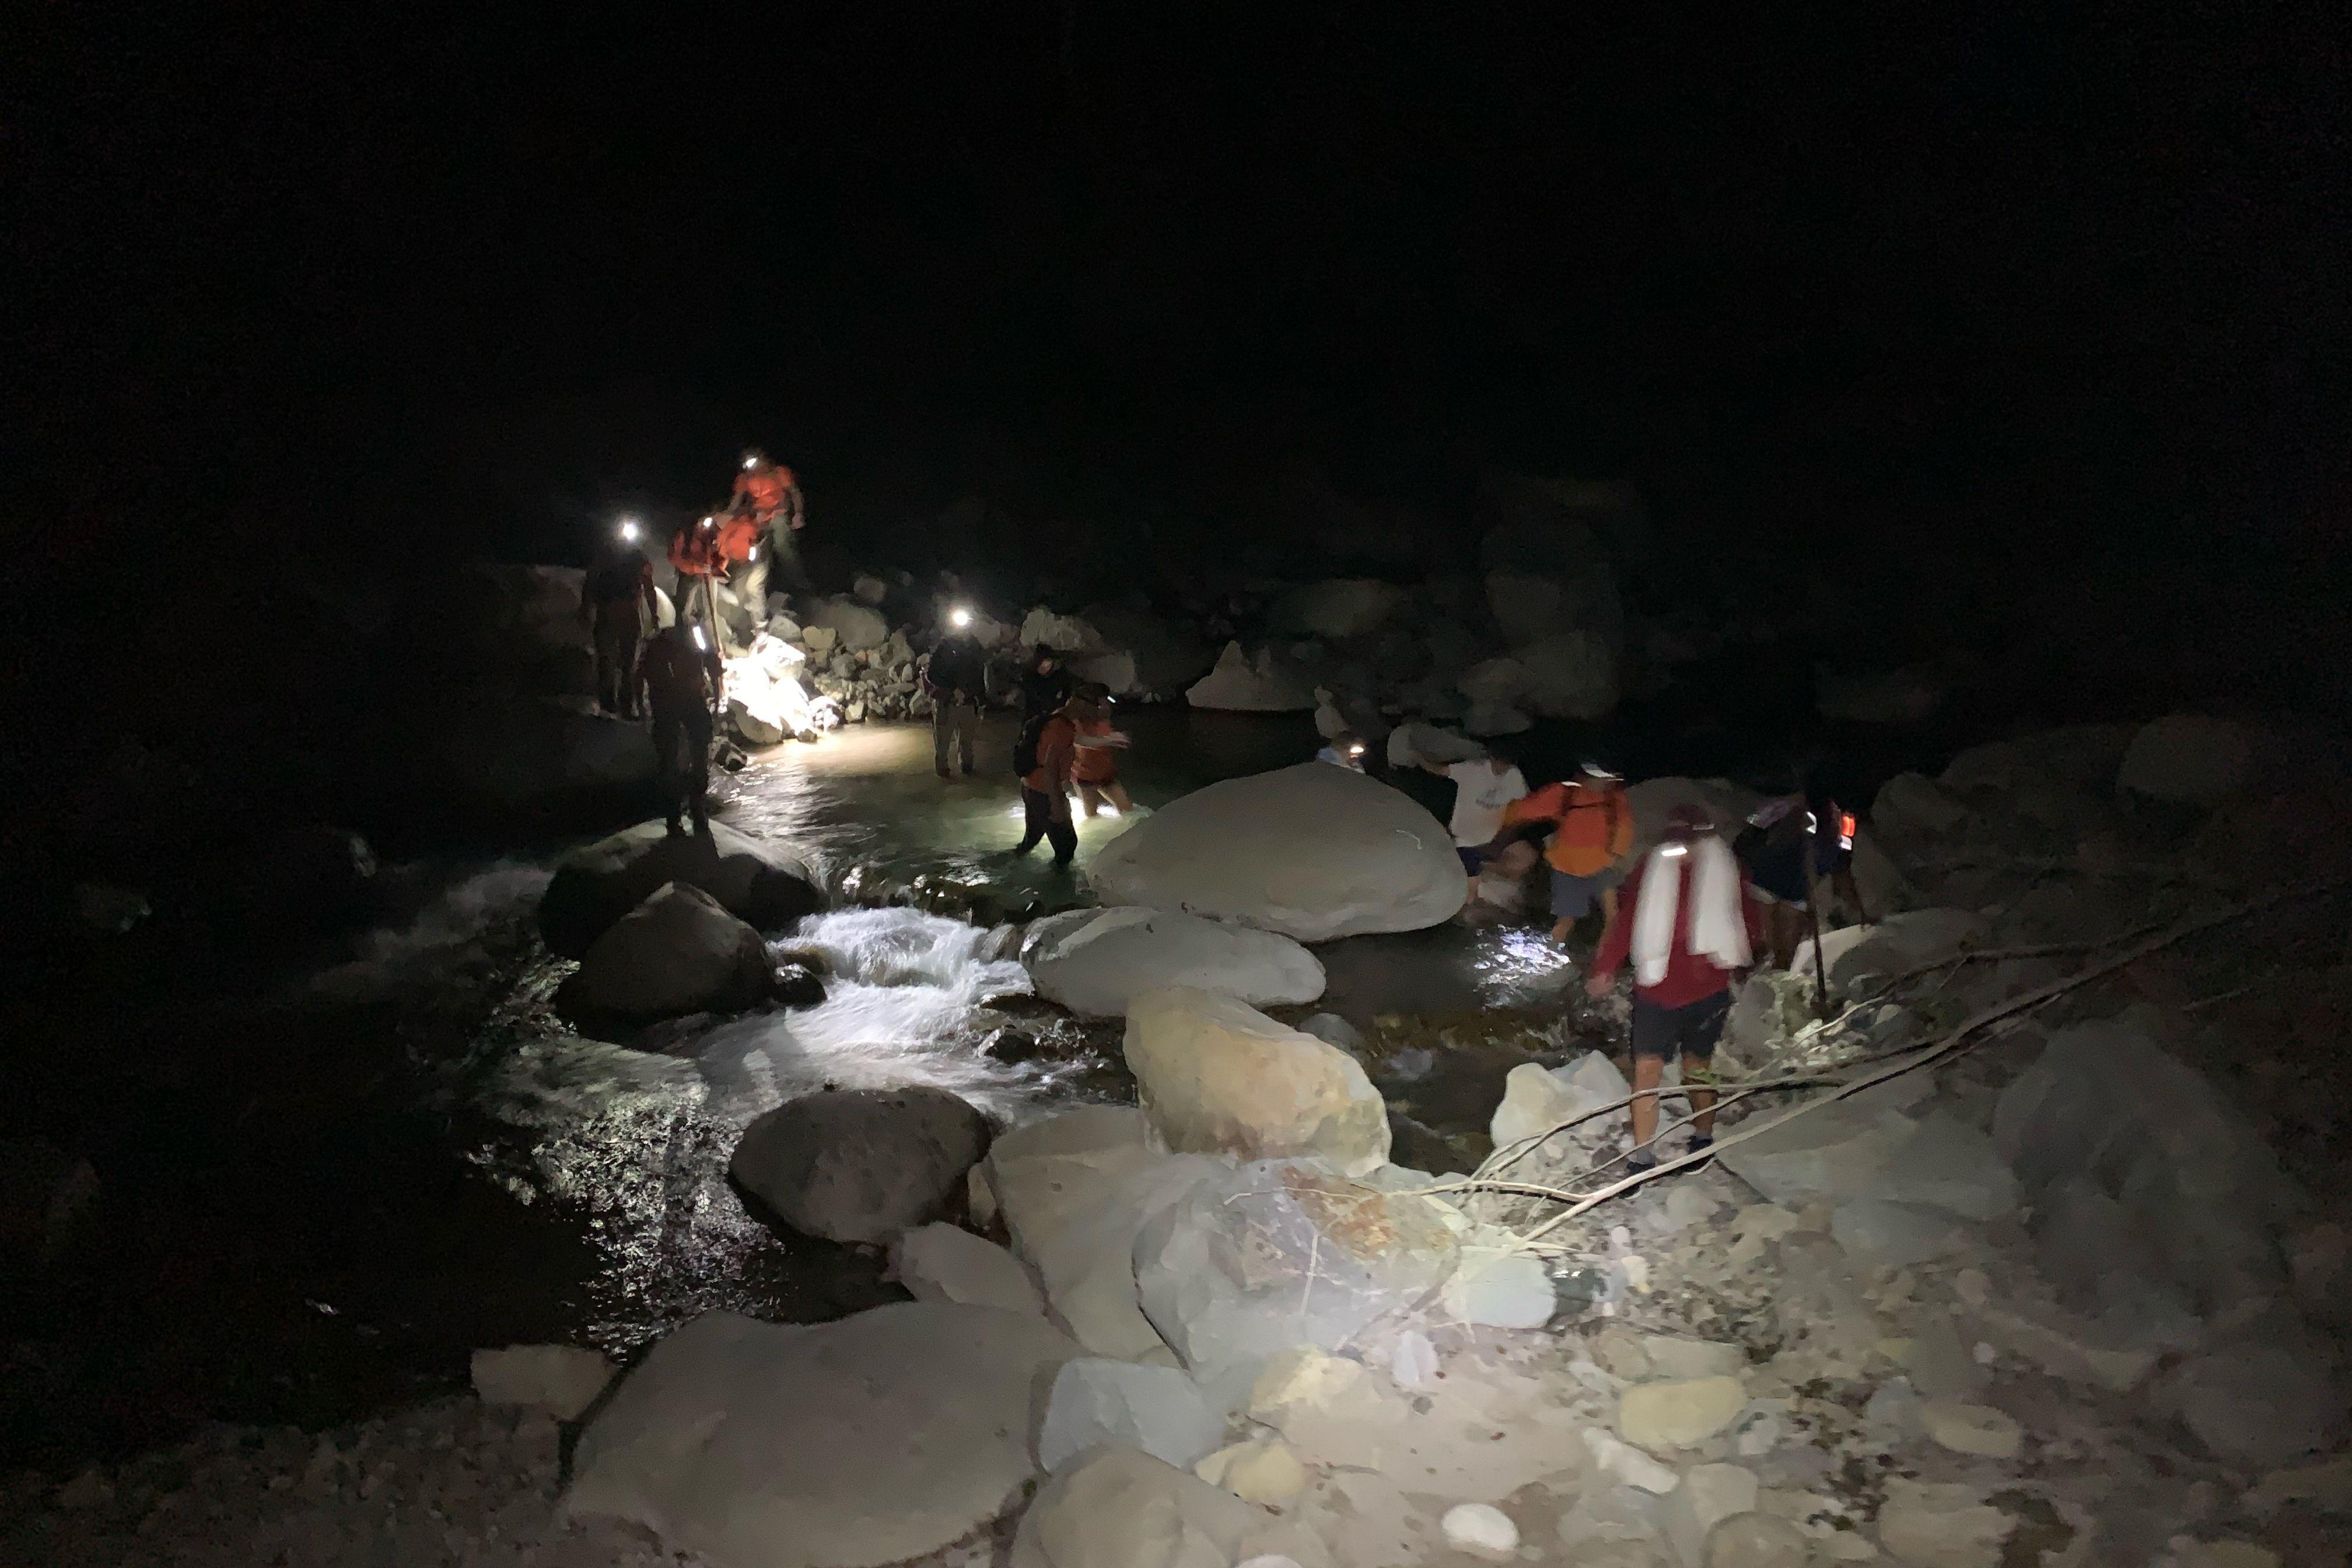 Image courtesy of&nbsp;Ventura County Sheriff's Office - iPhone's Emergency SOS saves 10 hikers from "Last Chance" canyon